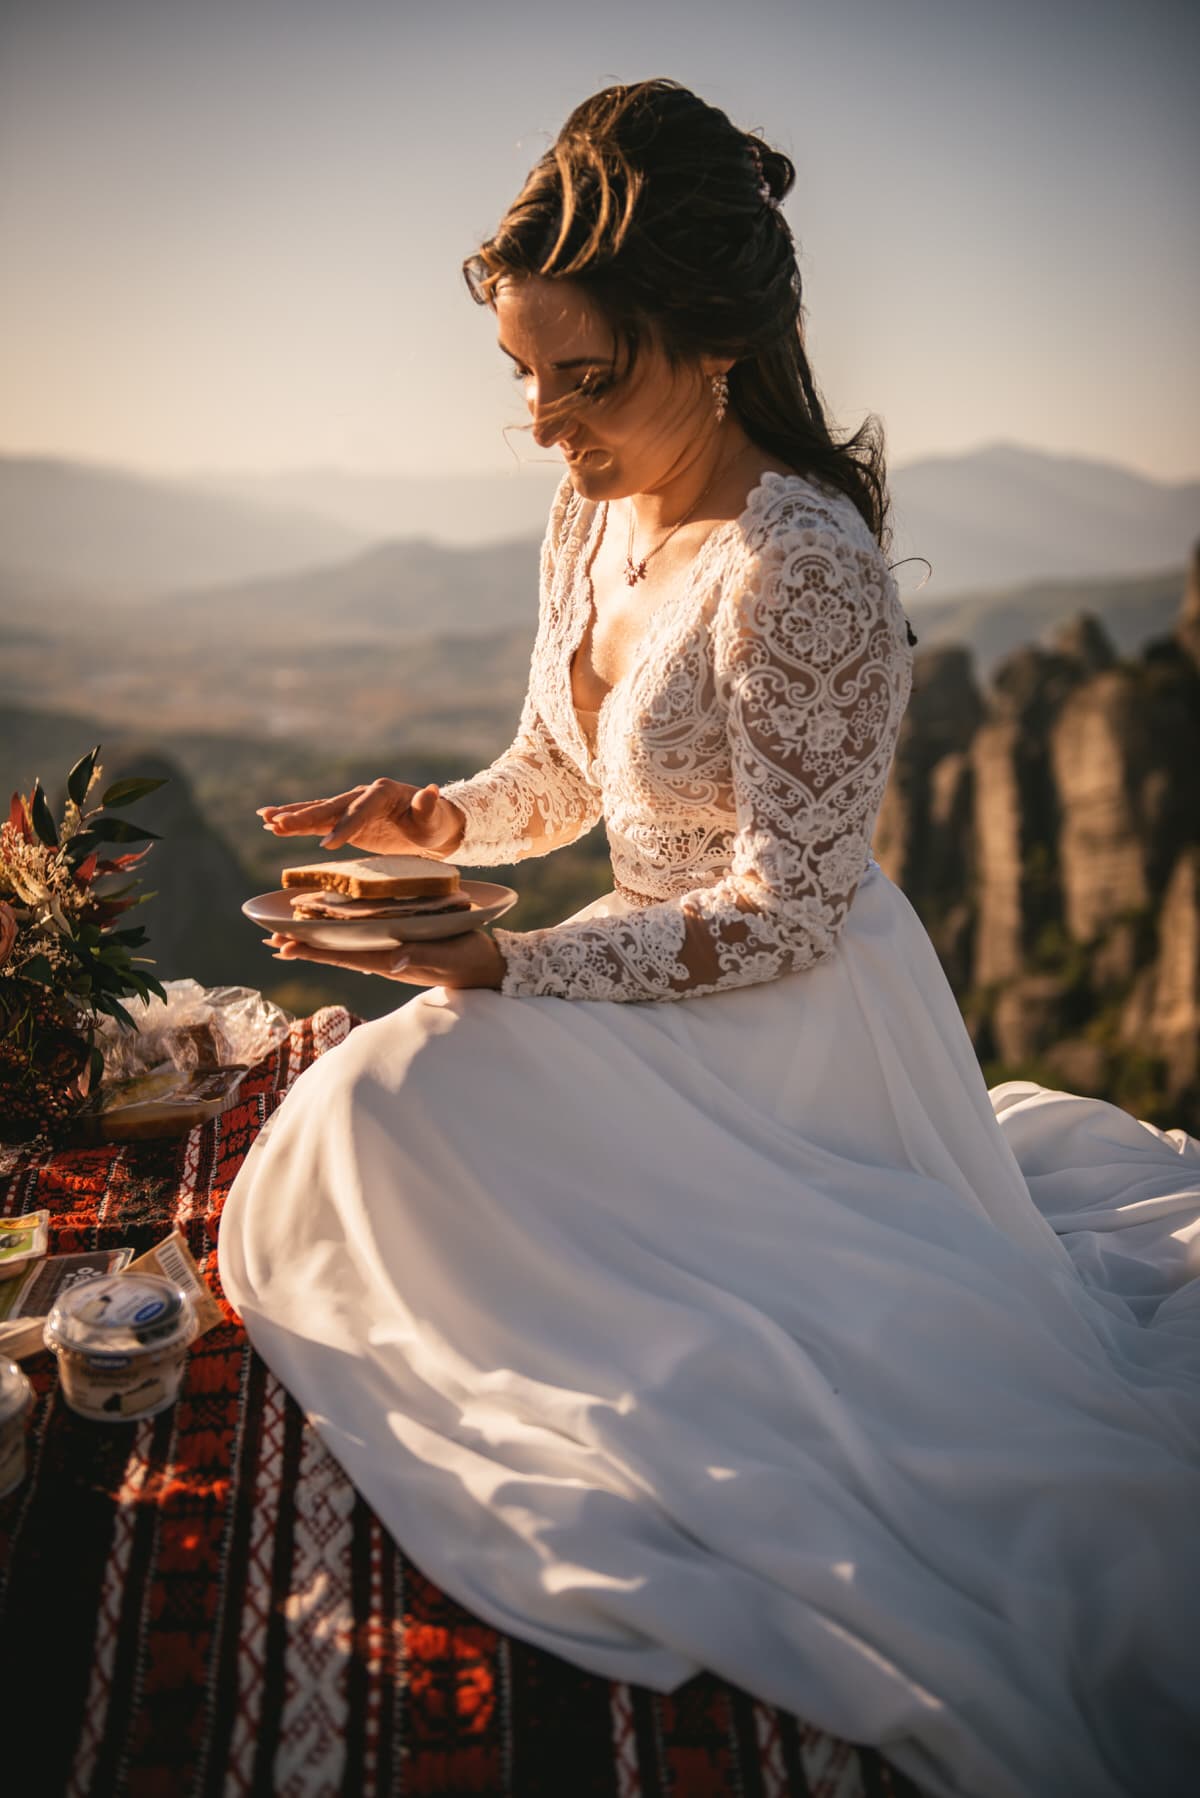 Bride getting ready on an elopement day in the Meteora